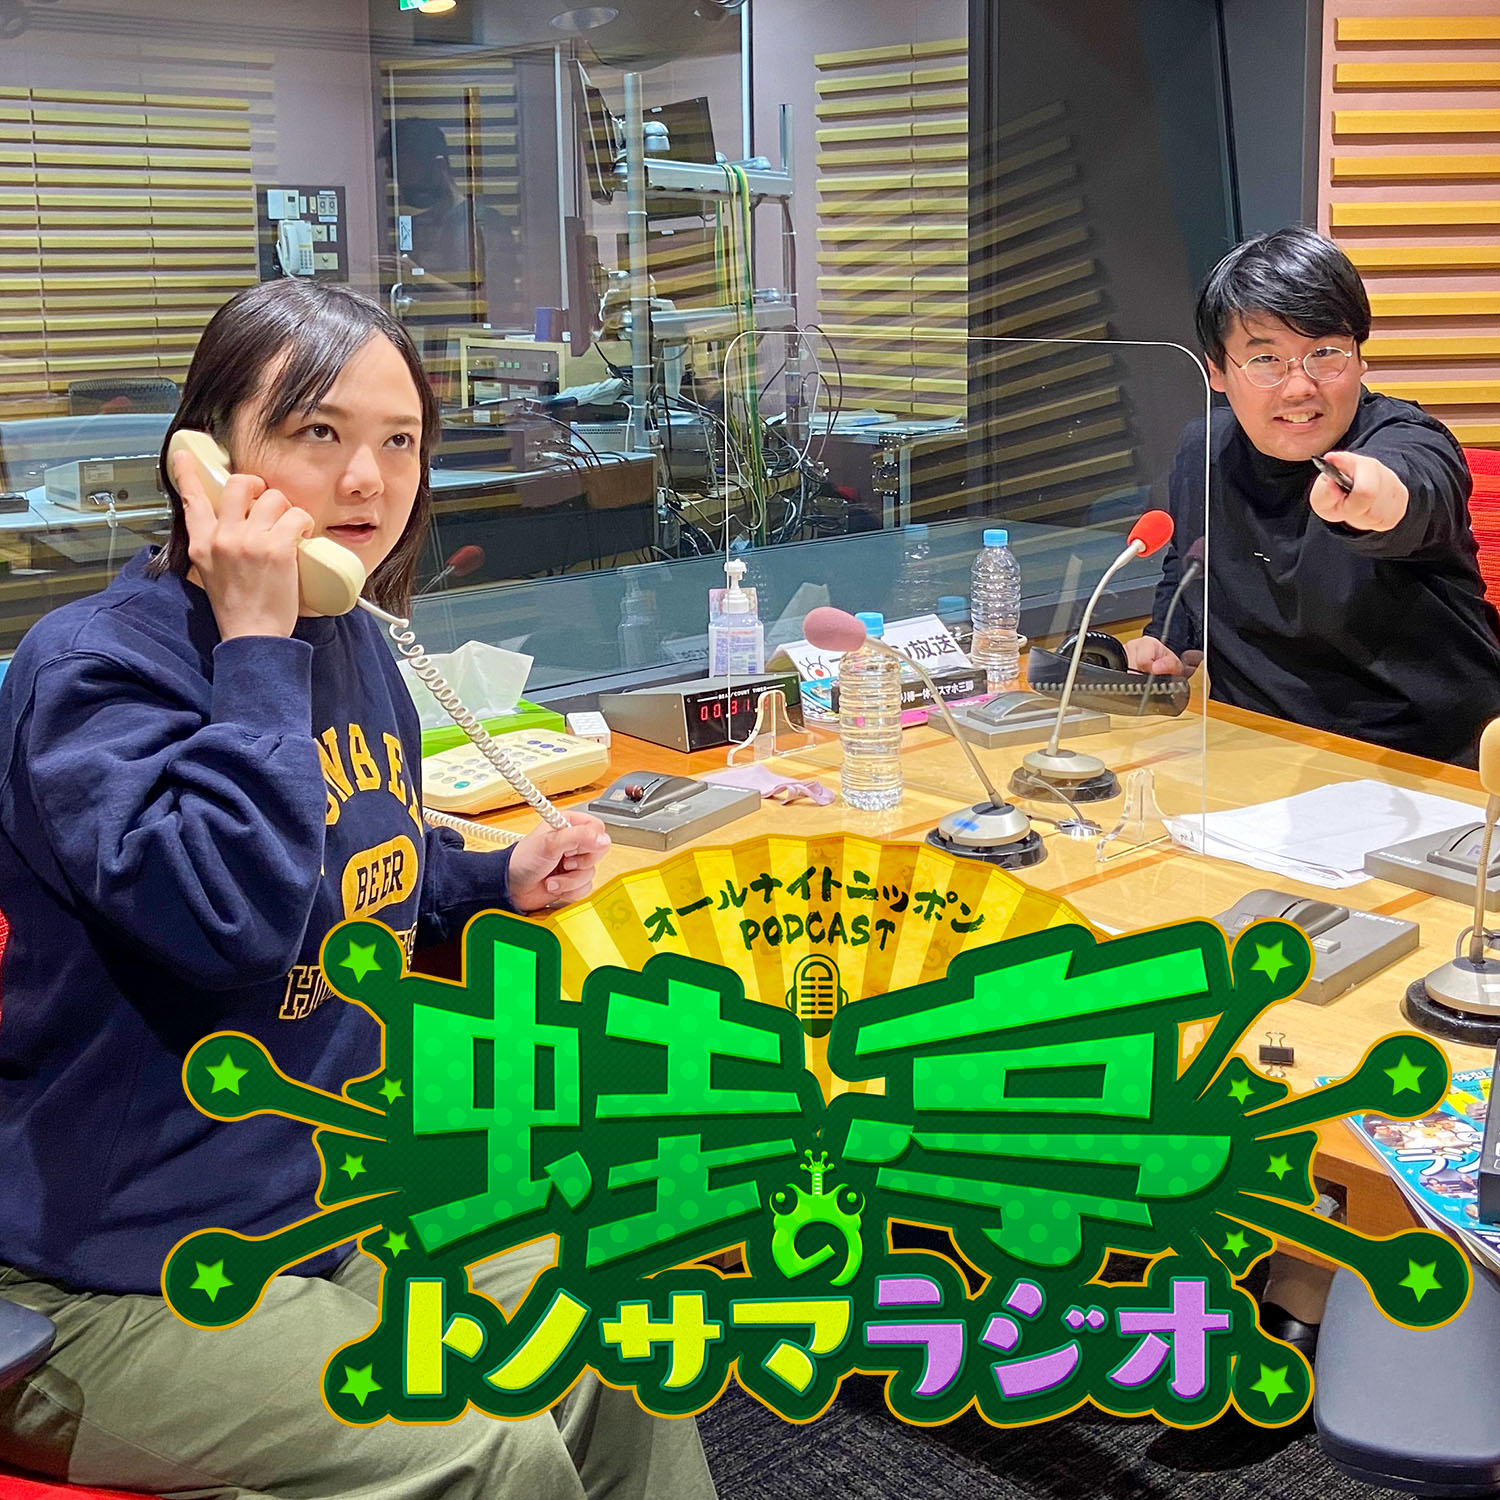 ep.59 は・や・く！